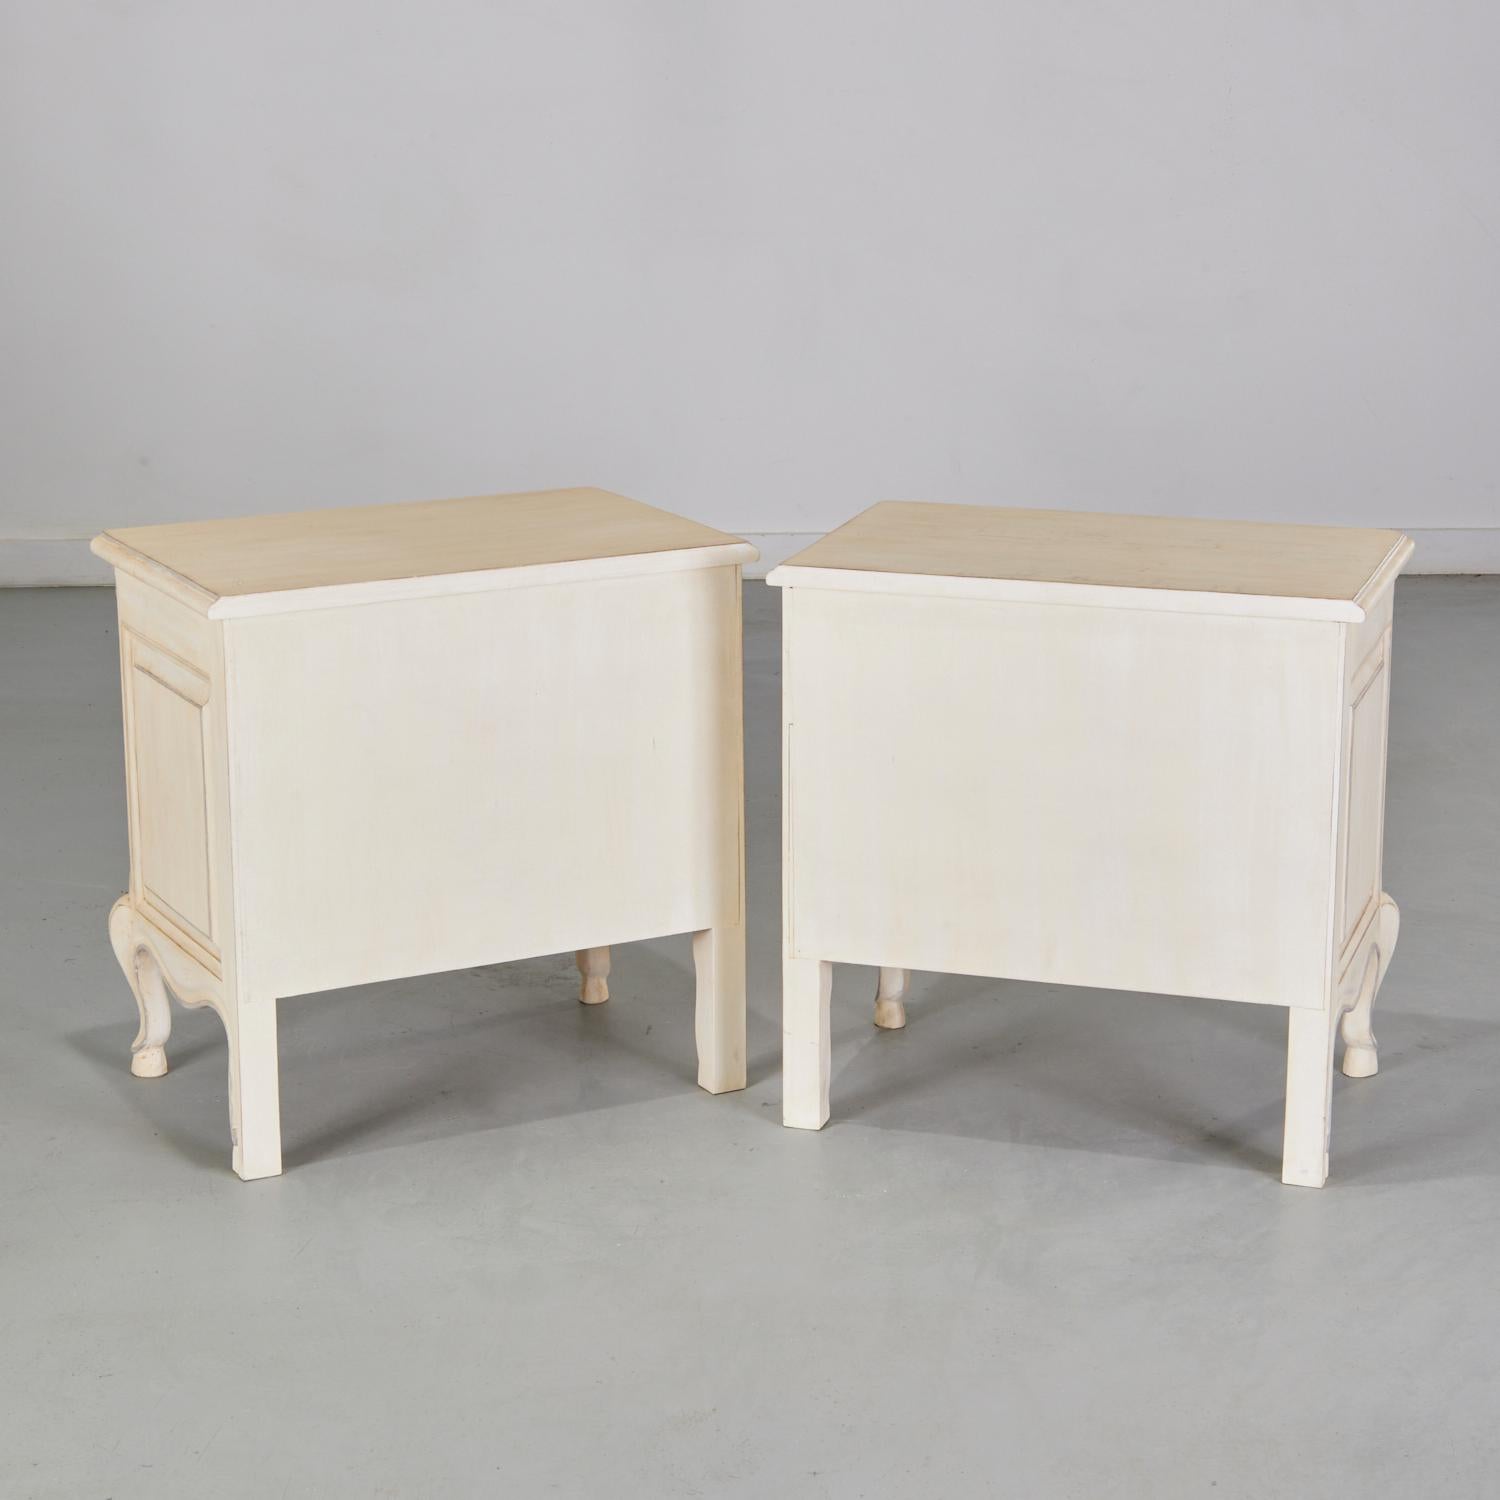 20th c. Pair of Louis XV Style Painted Nightstands with Fabric Door Lining For Sale 3